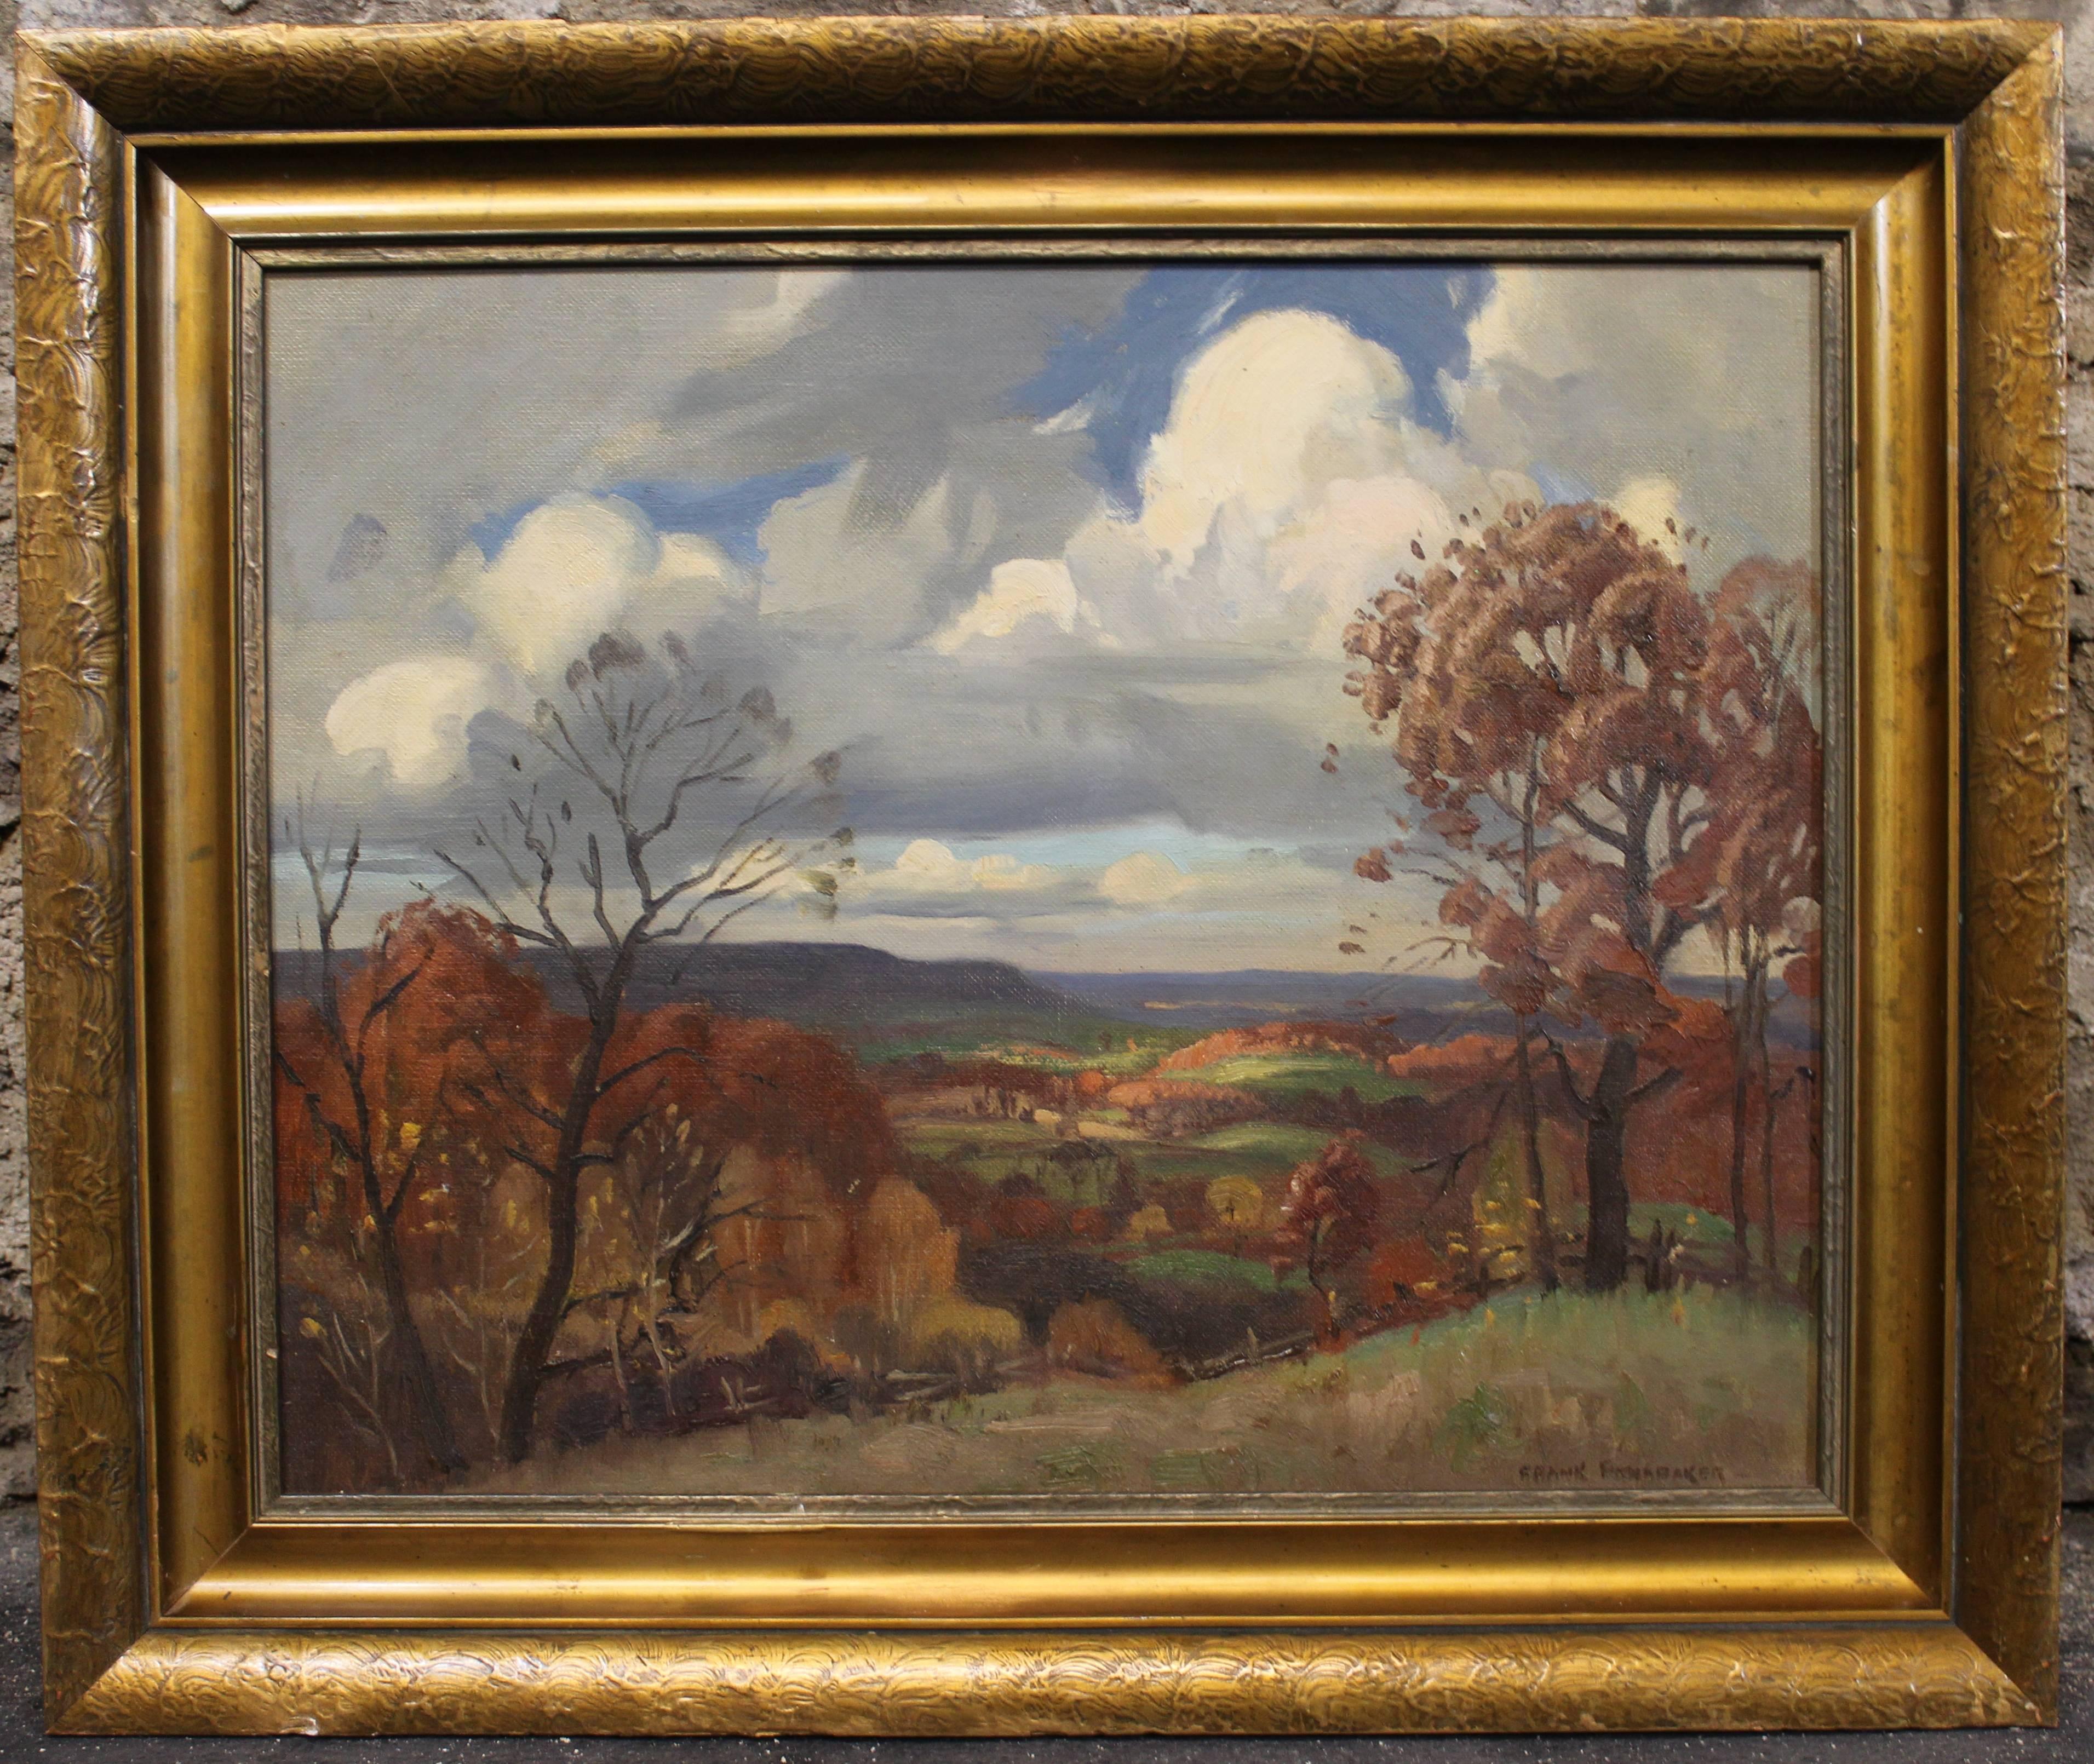 Frank Panabaker (1904–1992) was a painter of landscapes, with his focus on Southern Ontario. This painting depicts a view of Dundas Valley painted from the Tamahaac Club in Ancaster.

Panabaker was born in Hespeler, Ontario, the son of the local